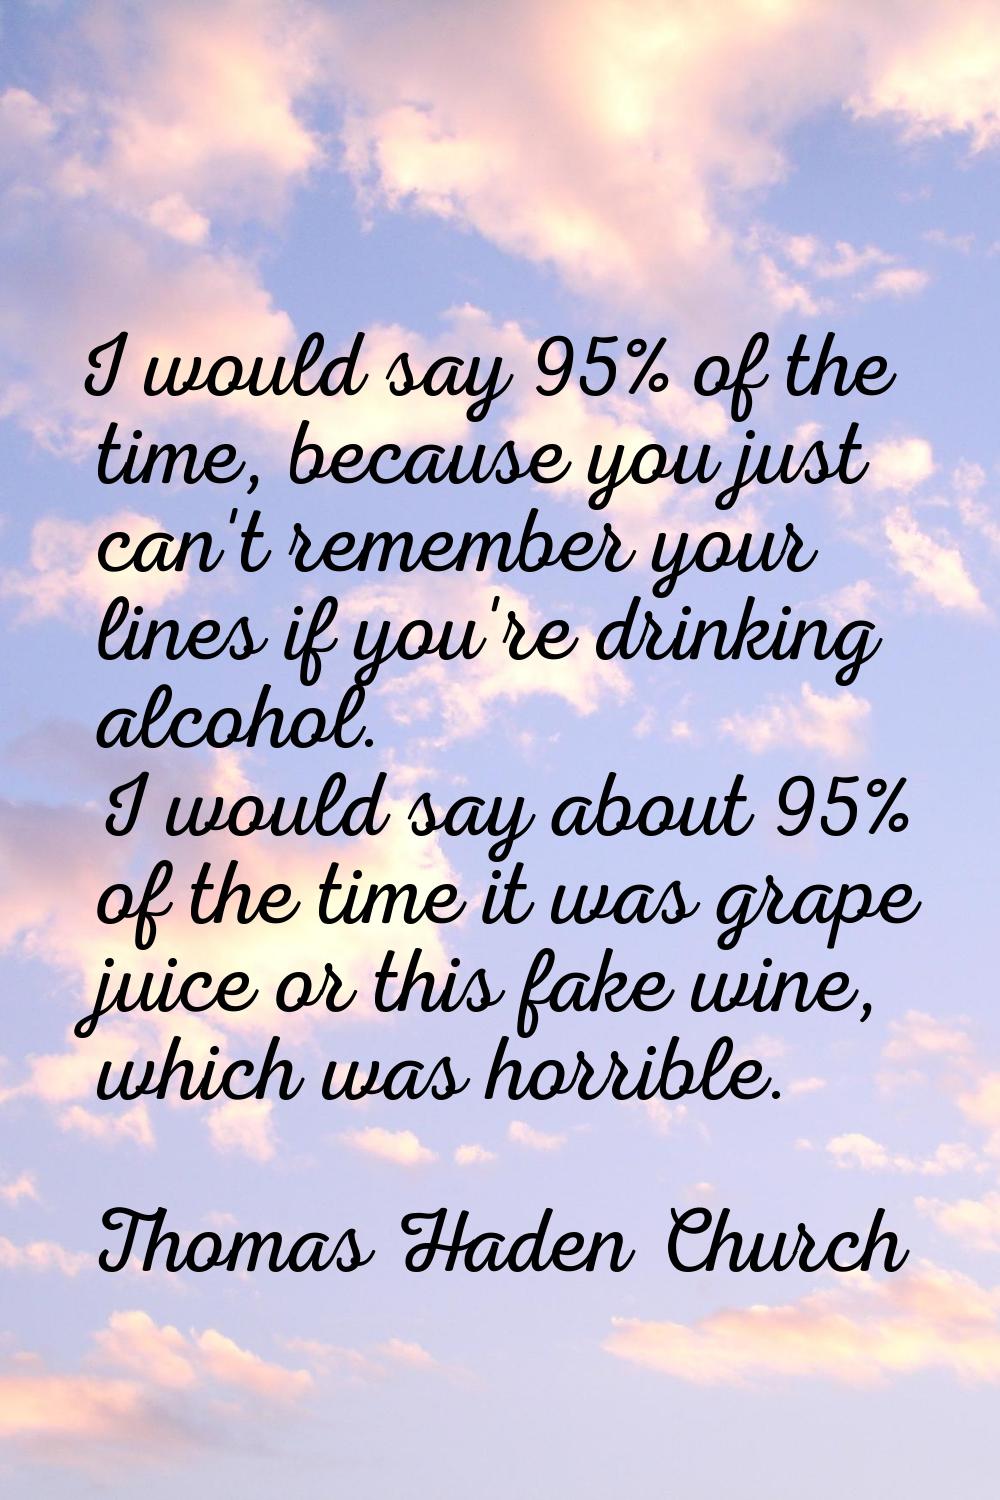 I would say 95% of the time, because you just can't remember your lines if you're drinking alcohol.